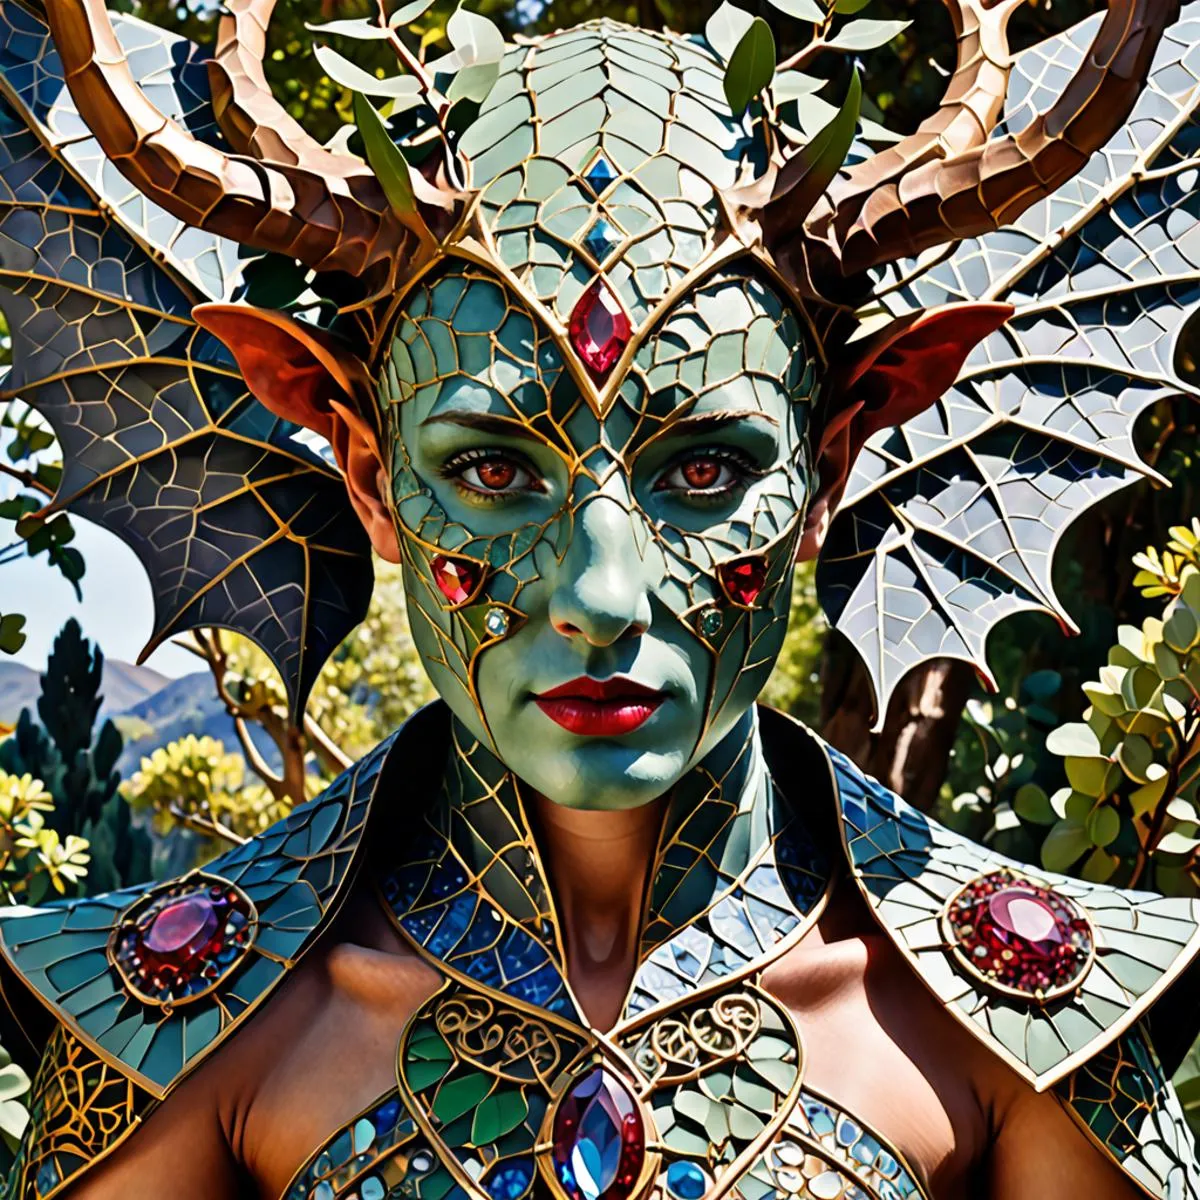 Fantasy character dressed as a dragon warrior with a mosaic-like costume, horns, and wings. AI generated image using stable diffusion.